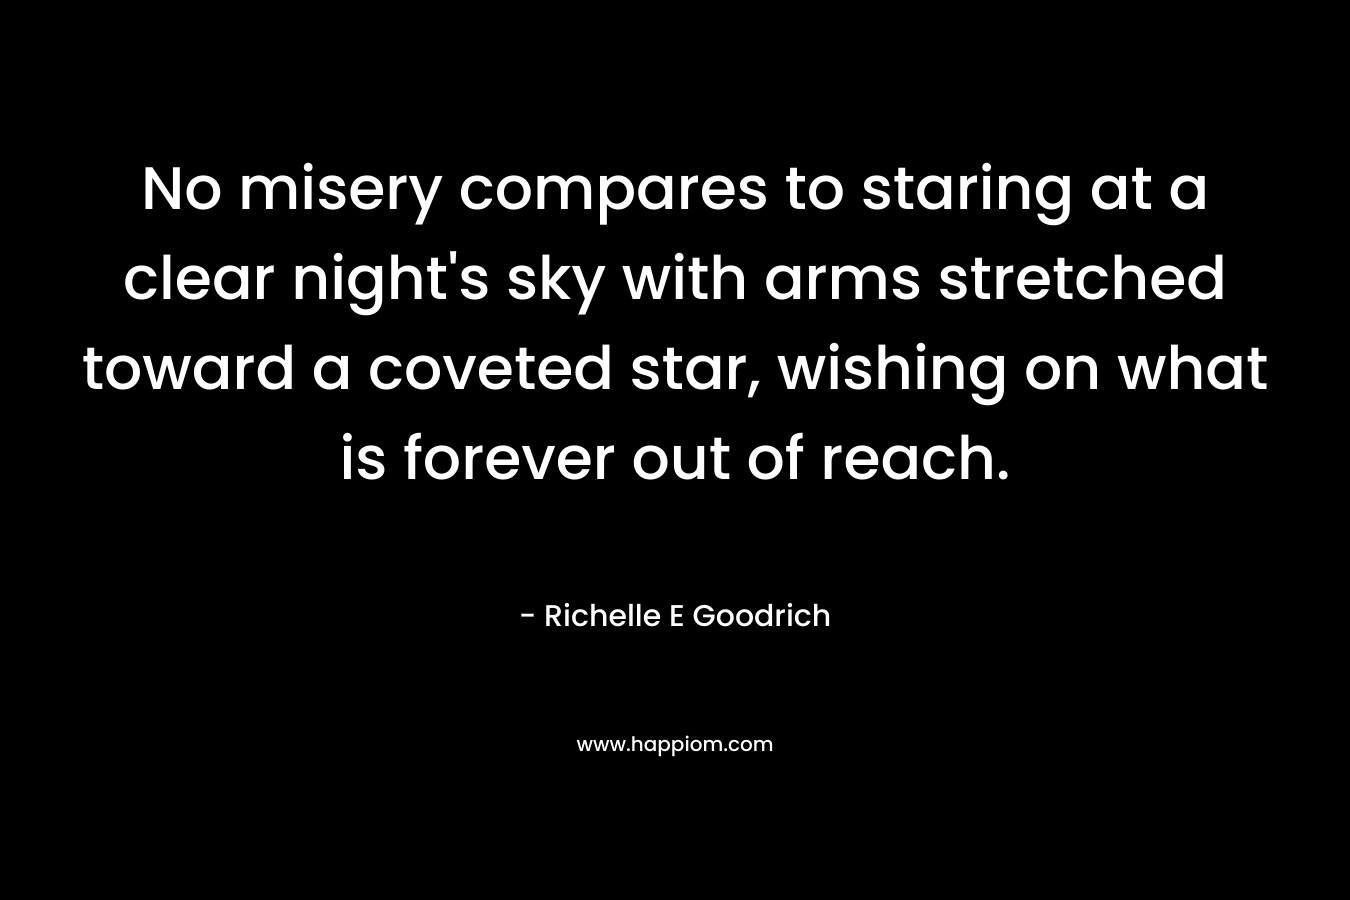 No misery compares to staring at a clear night’s sky with arms stretched toward a coveted star, wishing on what is forever out of reach. – Richelle E Goodrich